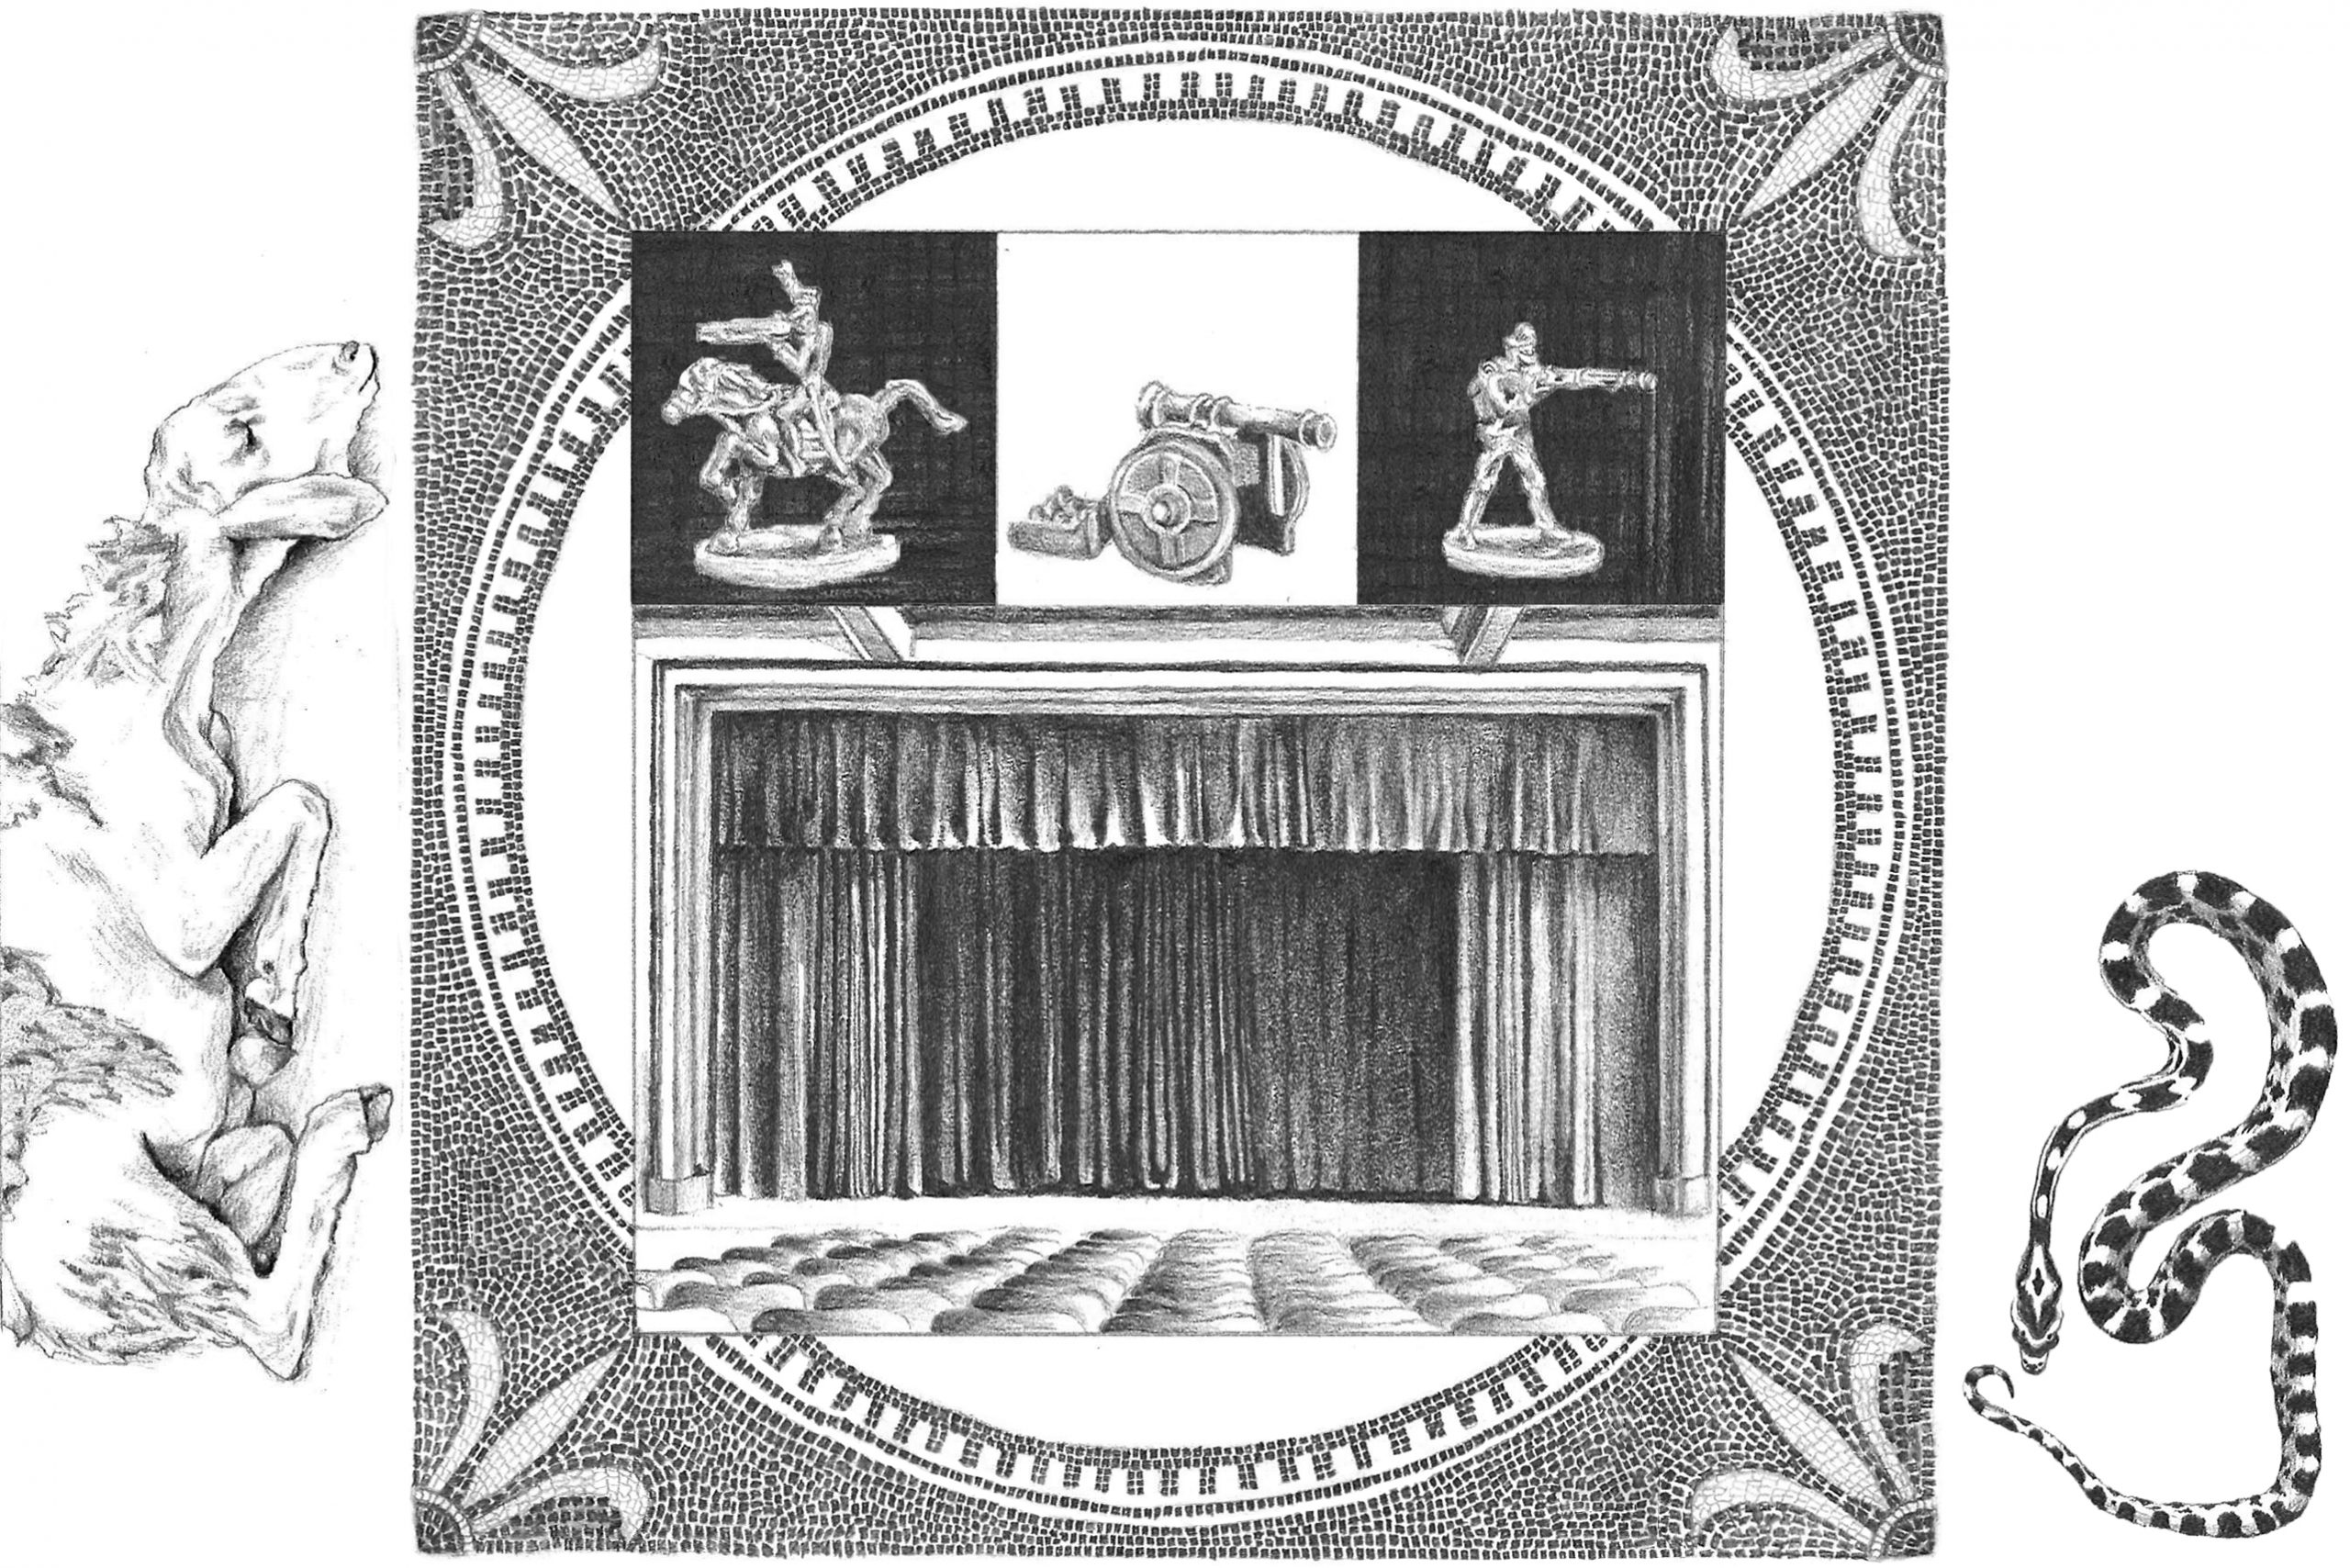 A black and white sketch of a stage featuring NiftyLit NFT